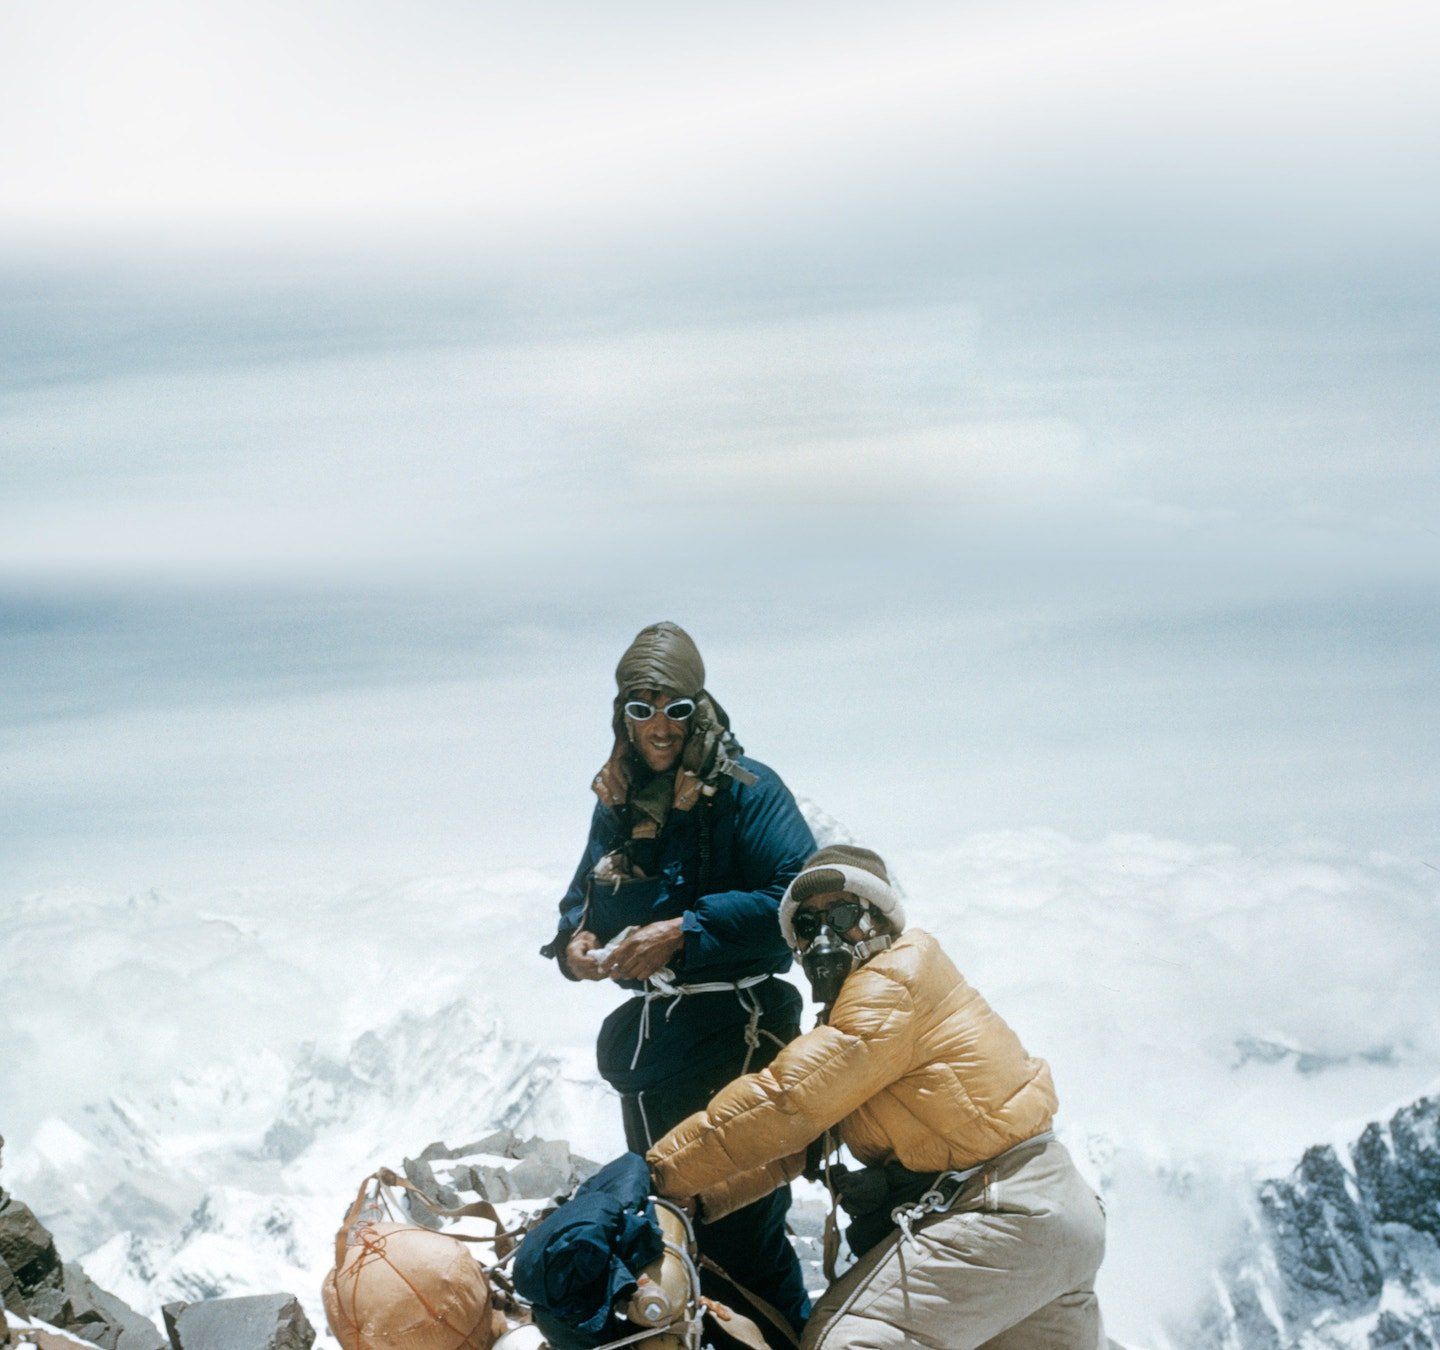 Edmund Hillary and Tenzing Norgay on Mt Everest in 1953